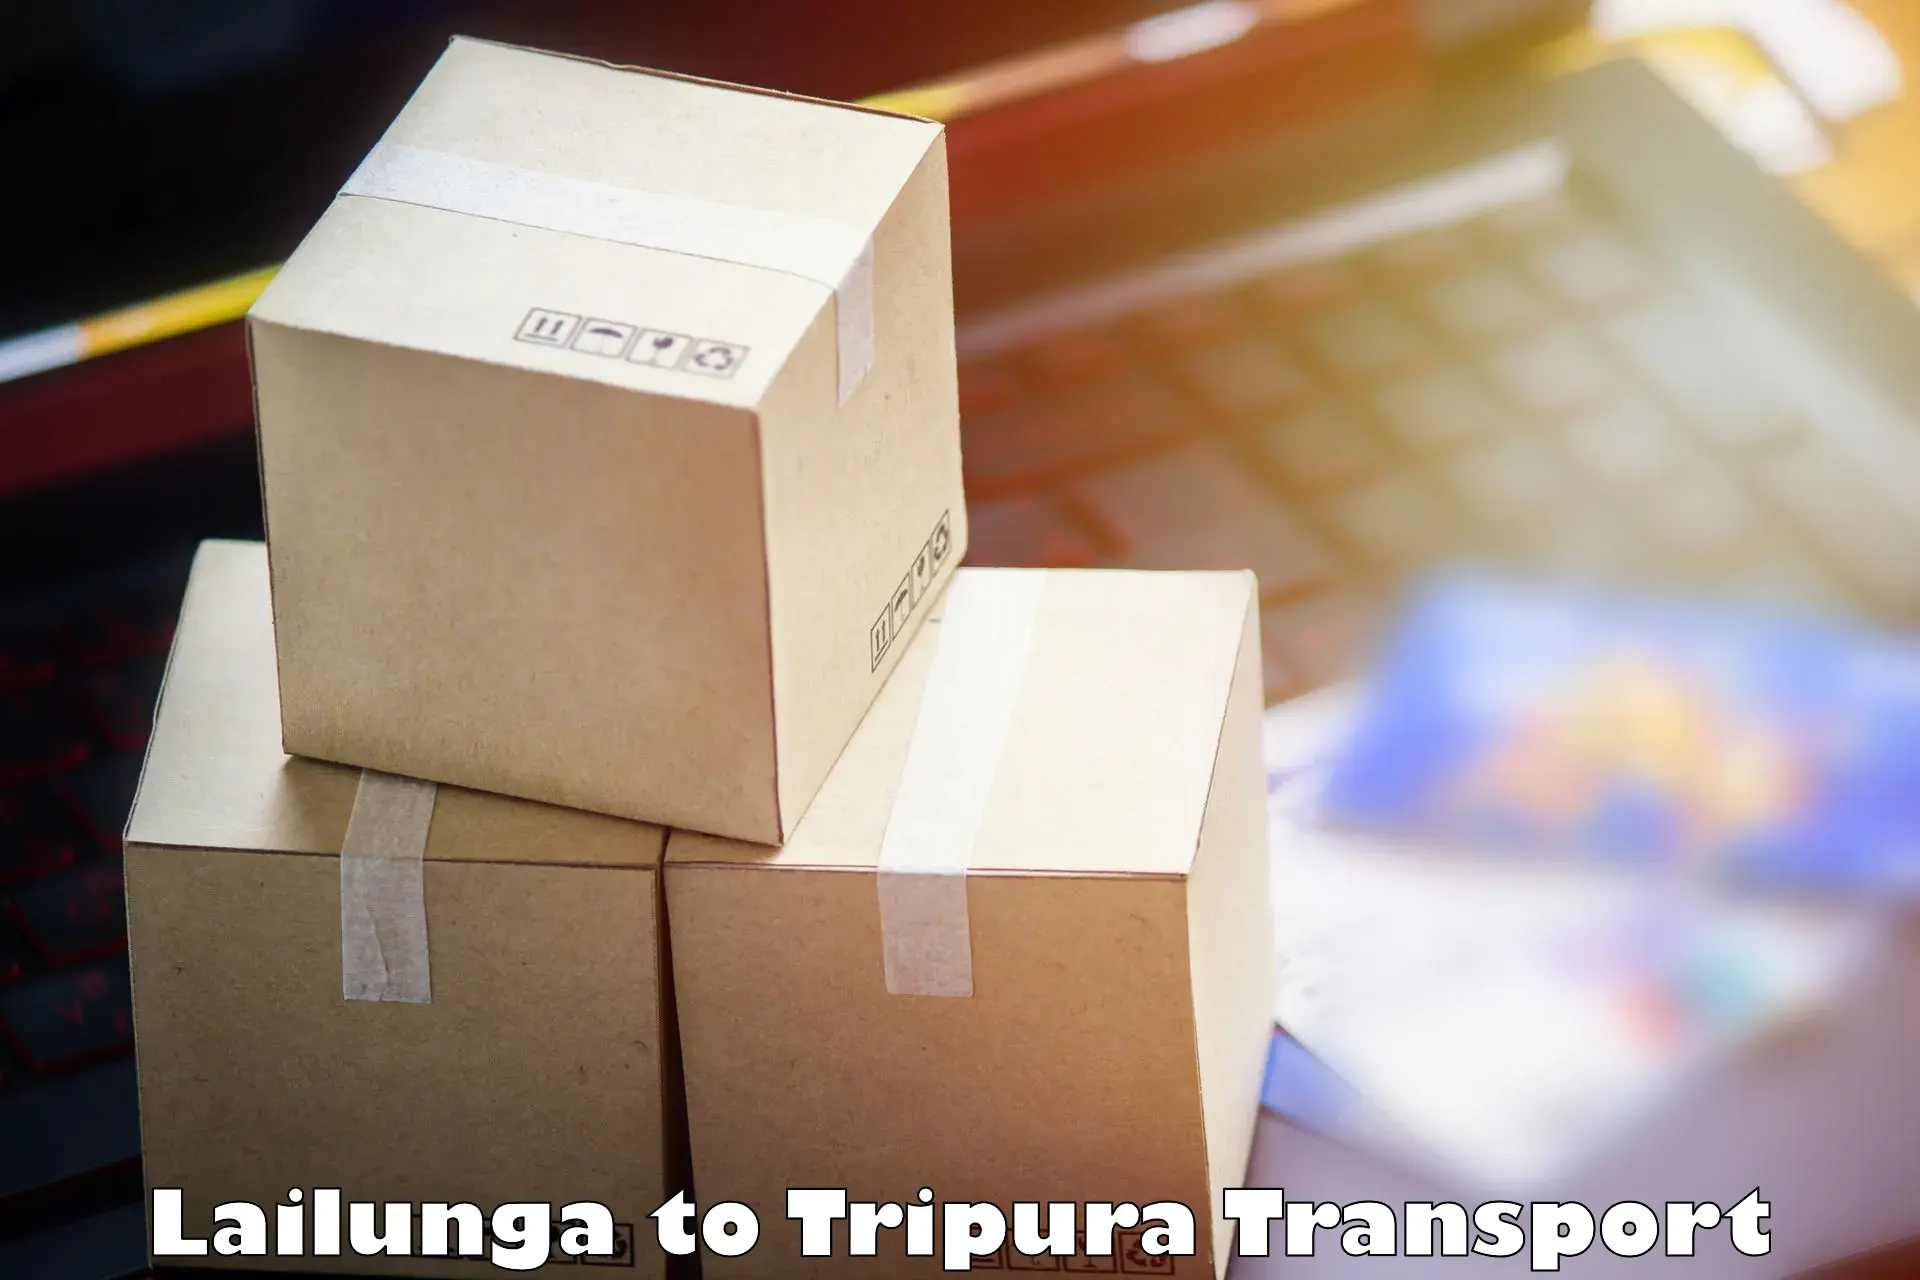 Nearby transport service Lailunga to West Tripura